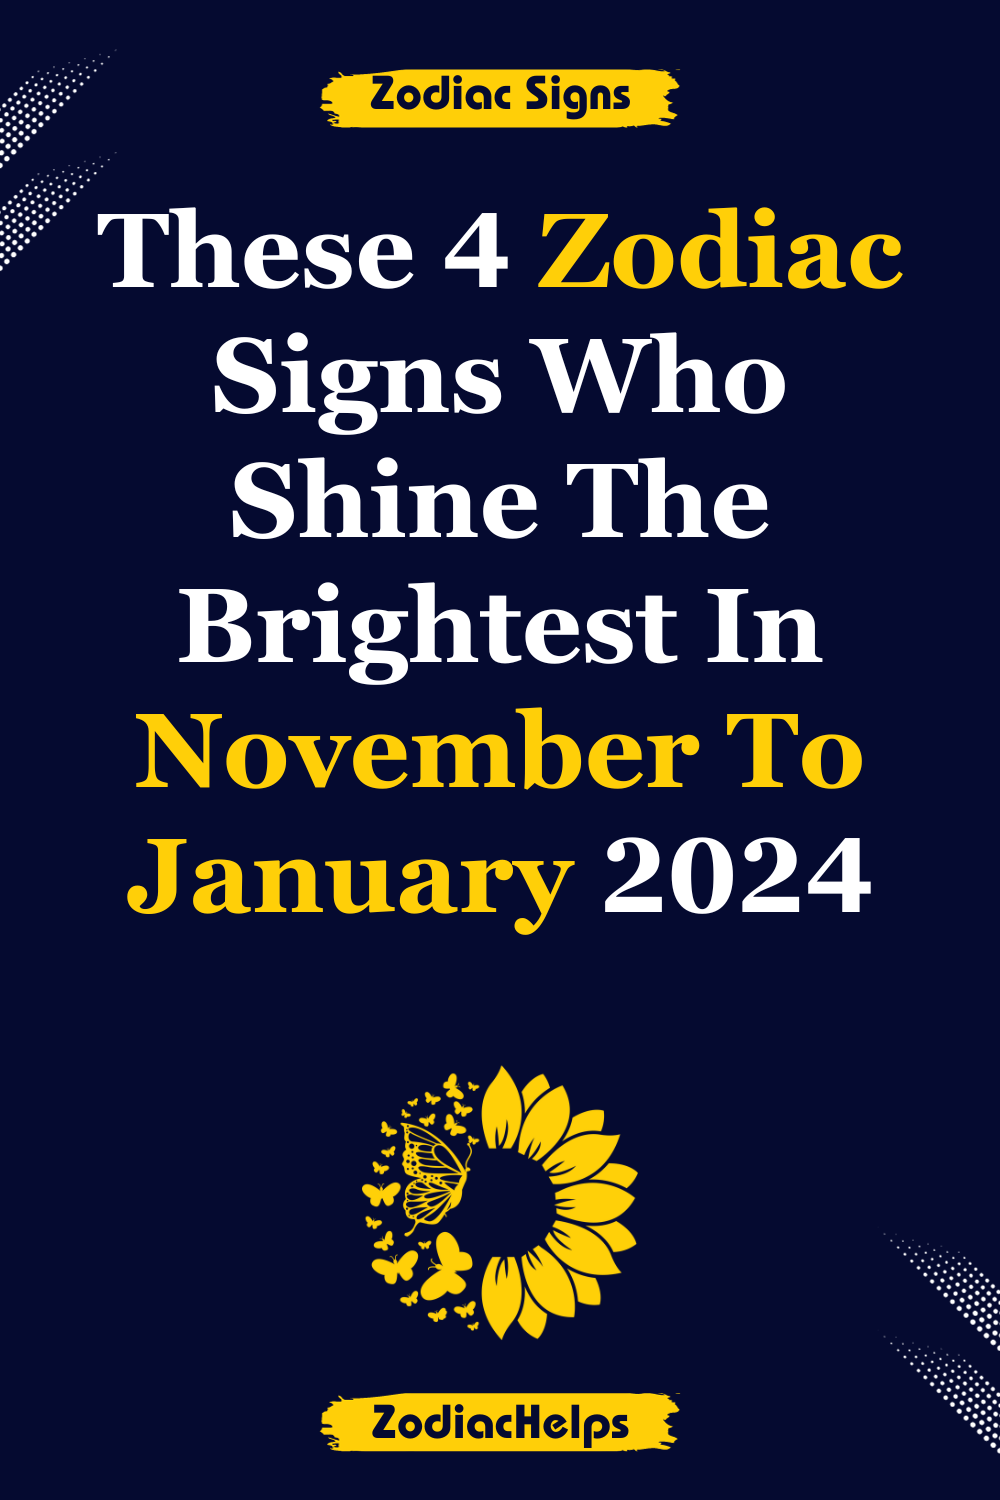 These 4 Zodiac Signs Who Shine The Brightest In November To January 2024